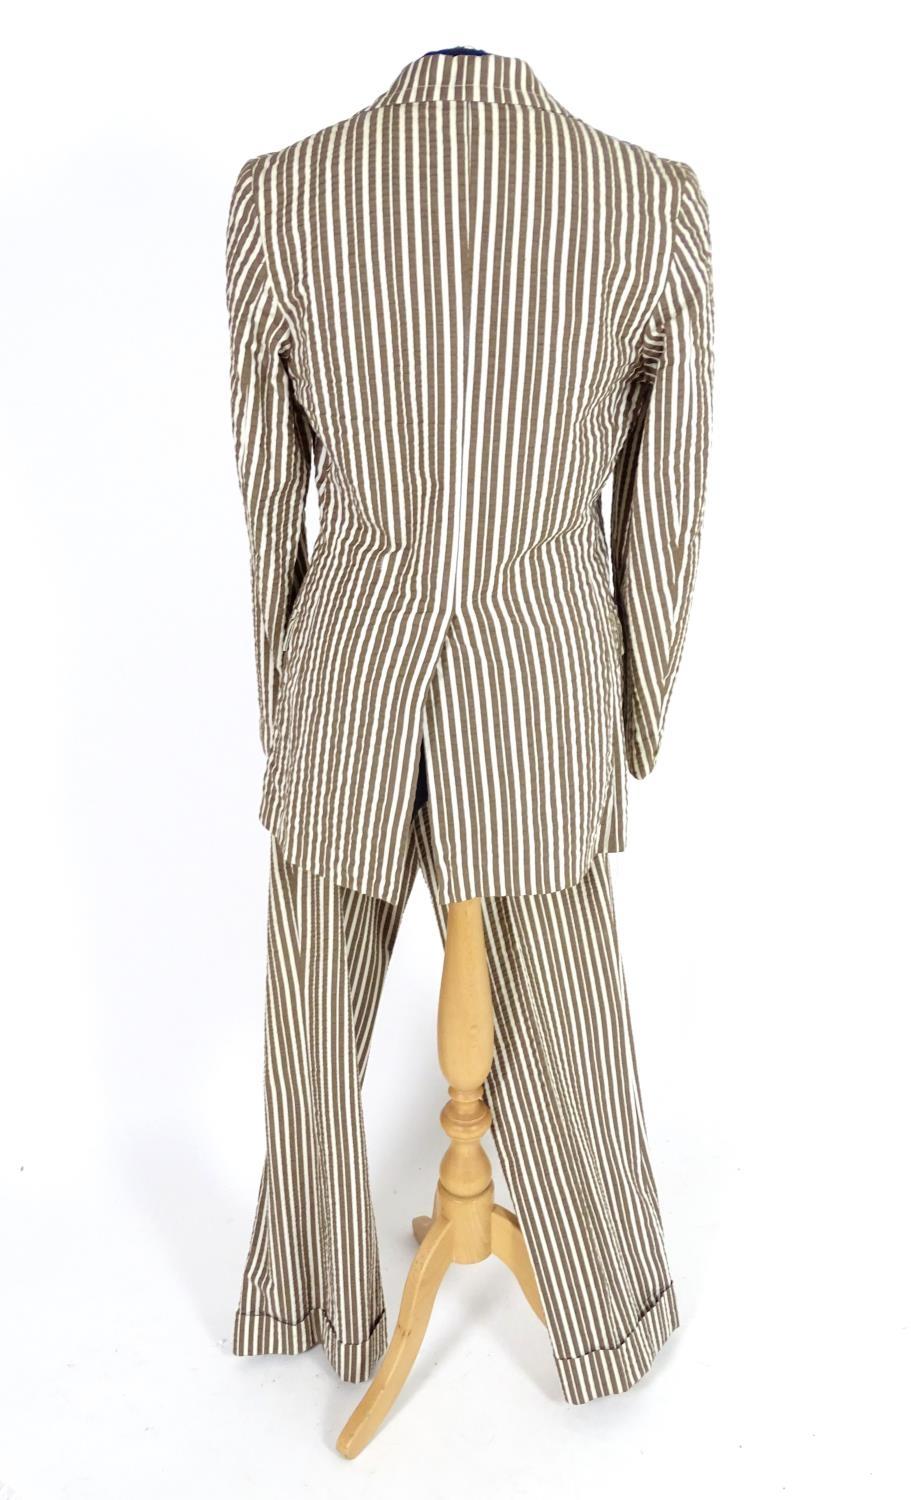 2 vintage stripy suits by Austins, a light brown and cream striped jacket and trousers along with - Image 7 of 10